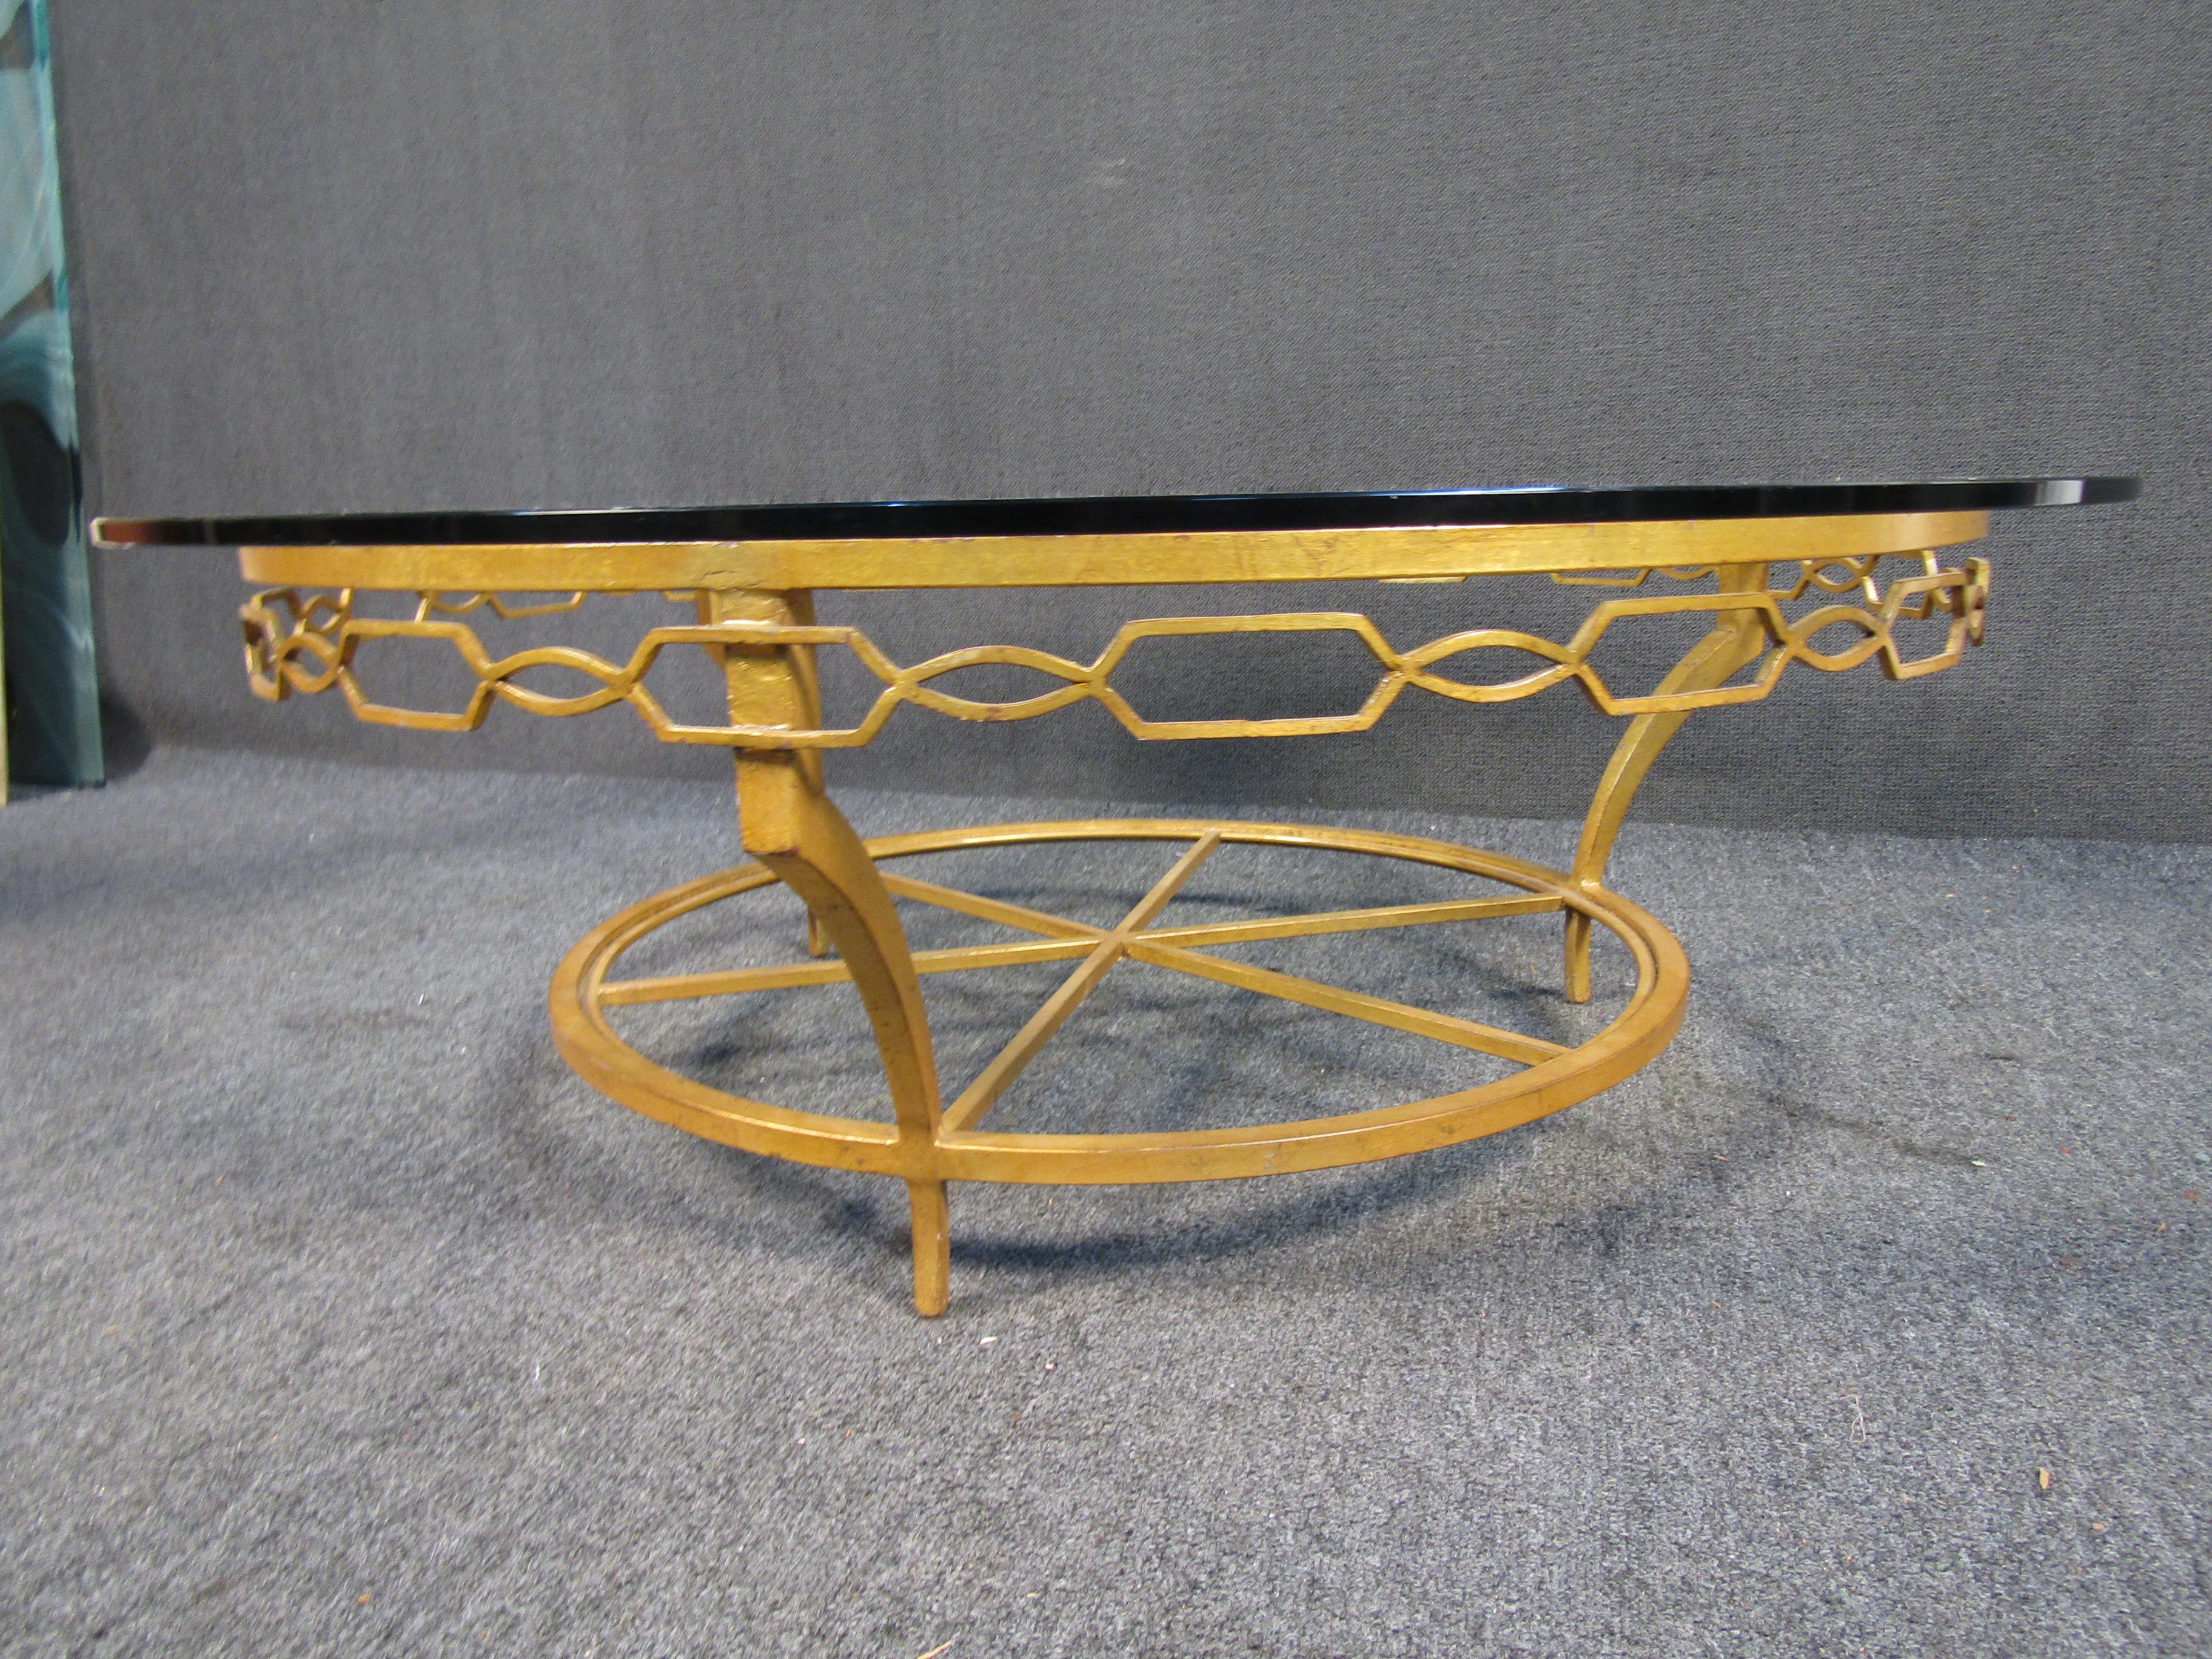 This vintage gold coffee table showcases a ornate metal base through its circular glass top. Perfect for enjoying coffee or drinks with company. This Mid-Century Modern table is stylish, sturdy and a perfect center piece to any living space.

